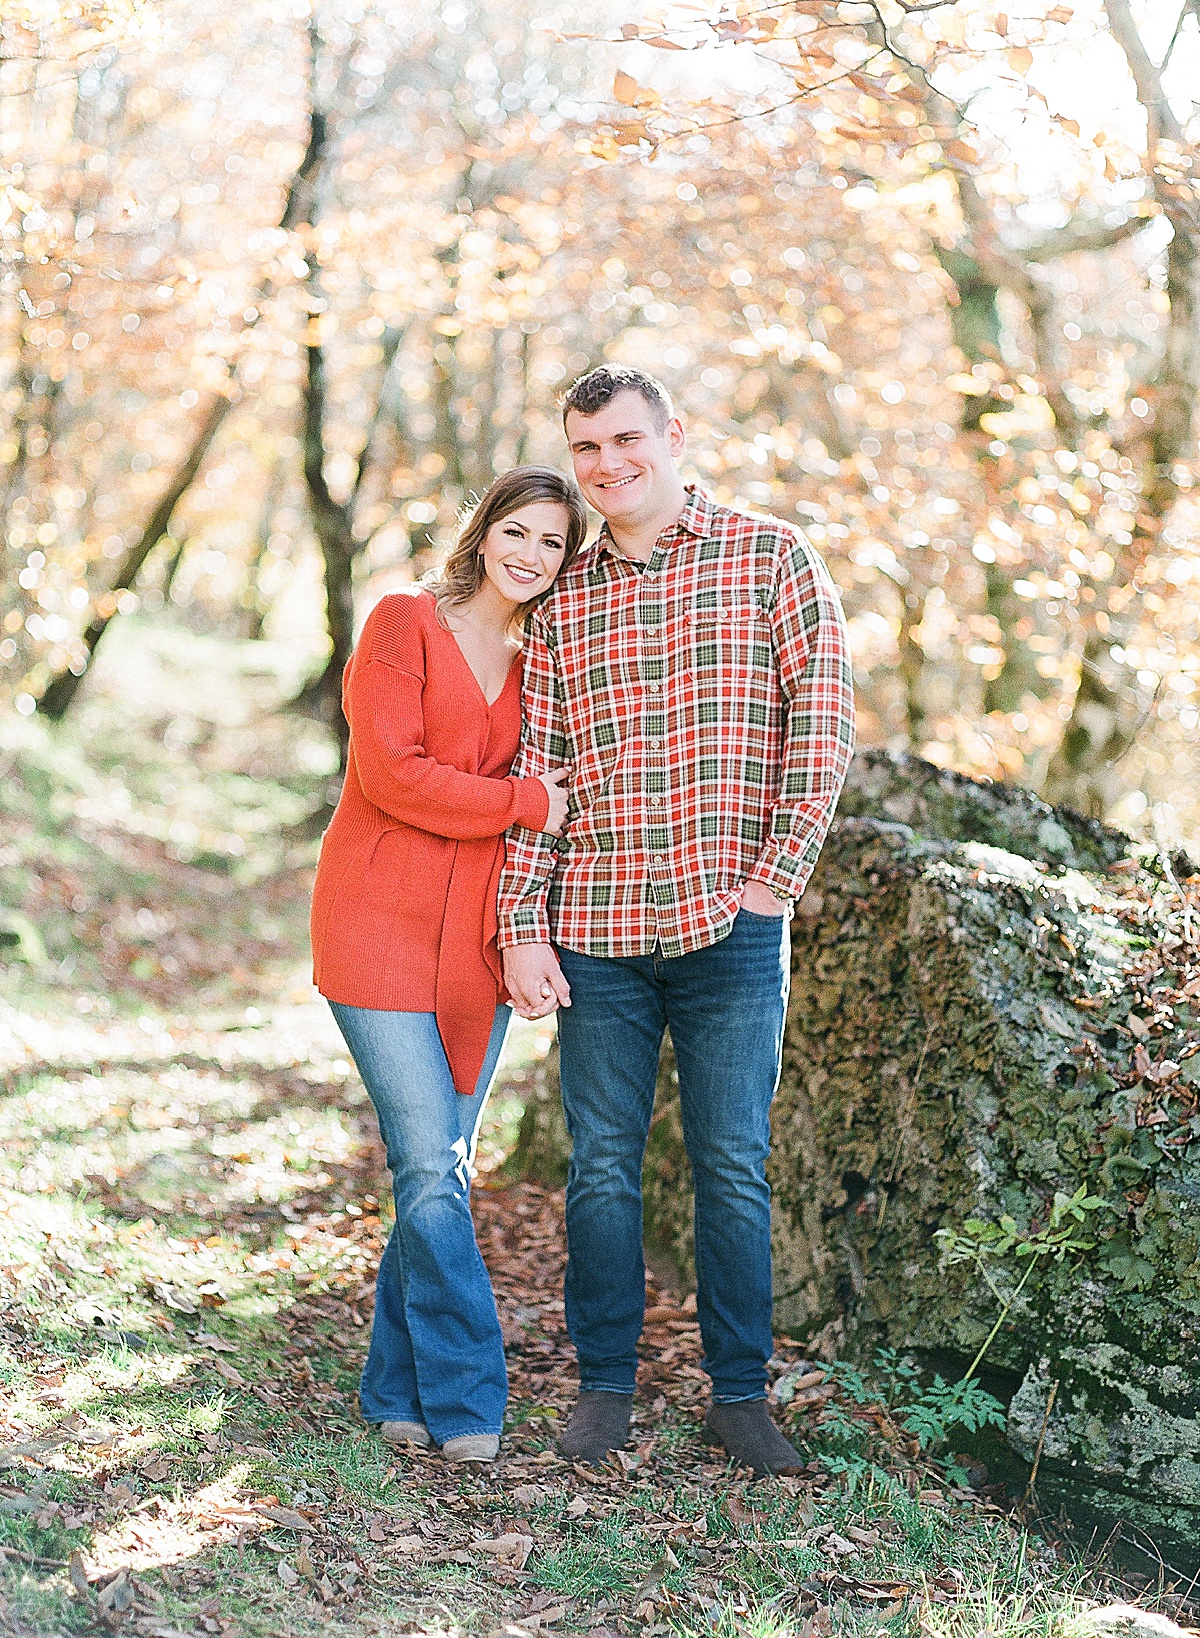 Craggy Gardens Engagement Couple Holding Hands Smiling at Camera Photo